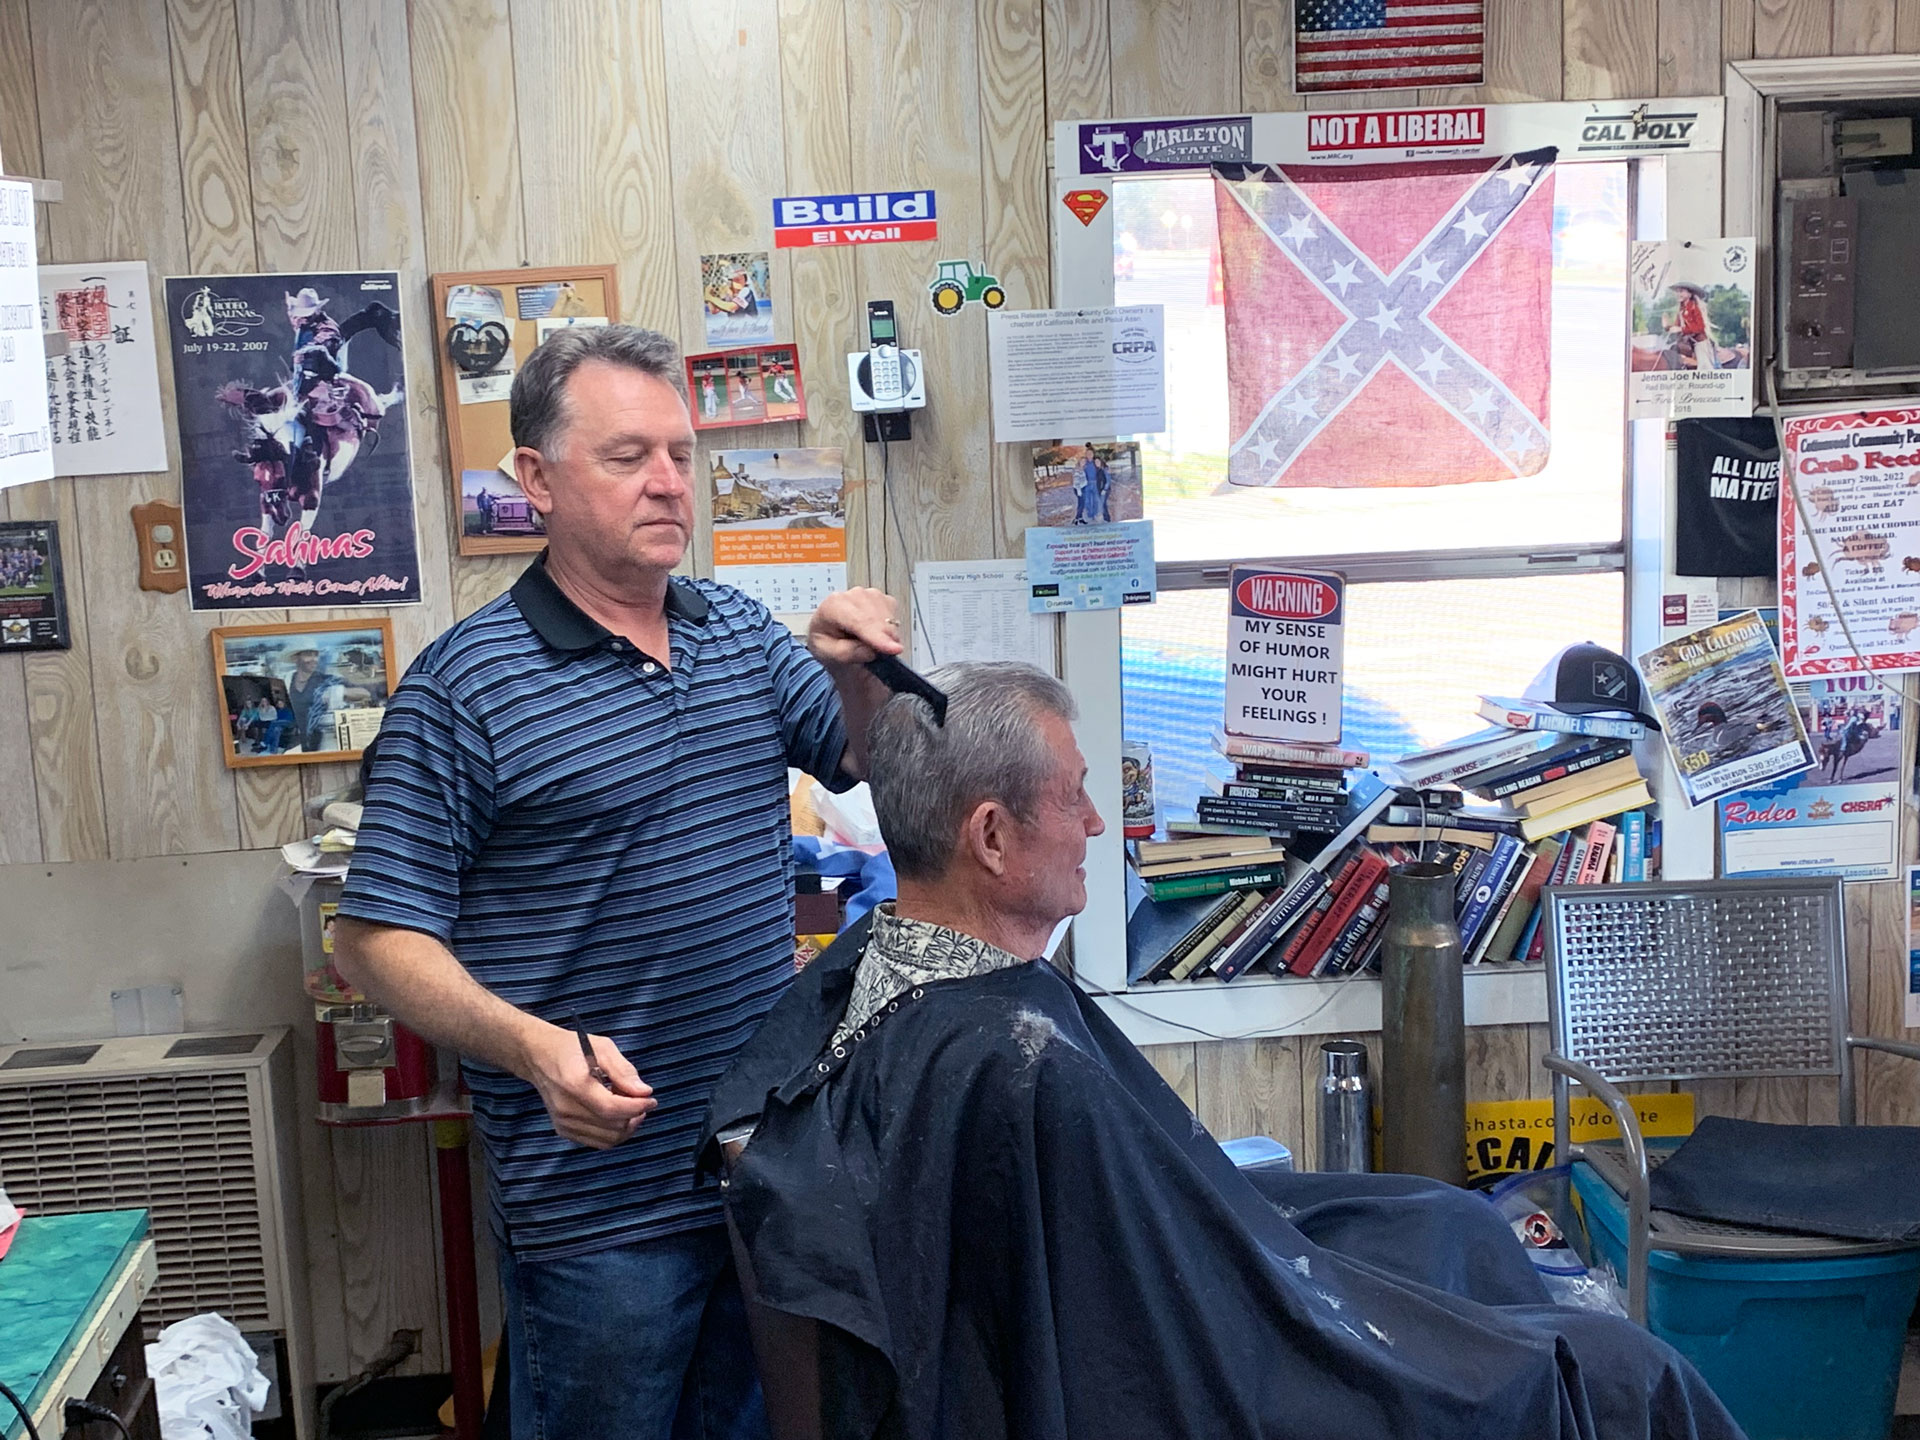 Barber combs man's hair with backdrop of confederate flag in the window, along with various bumper stickers including 'Build El Wall' and 'not a liberal' 